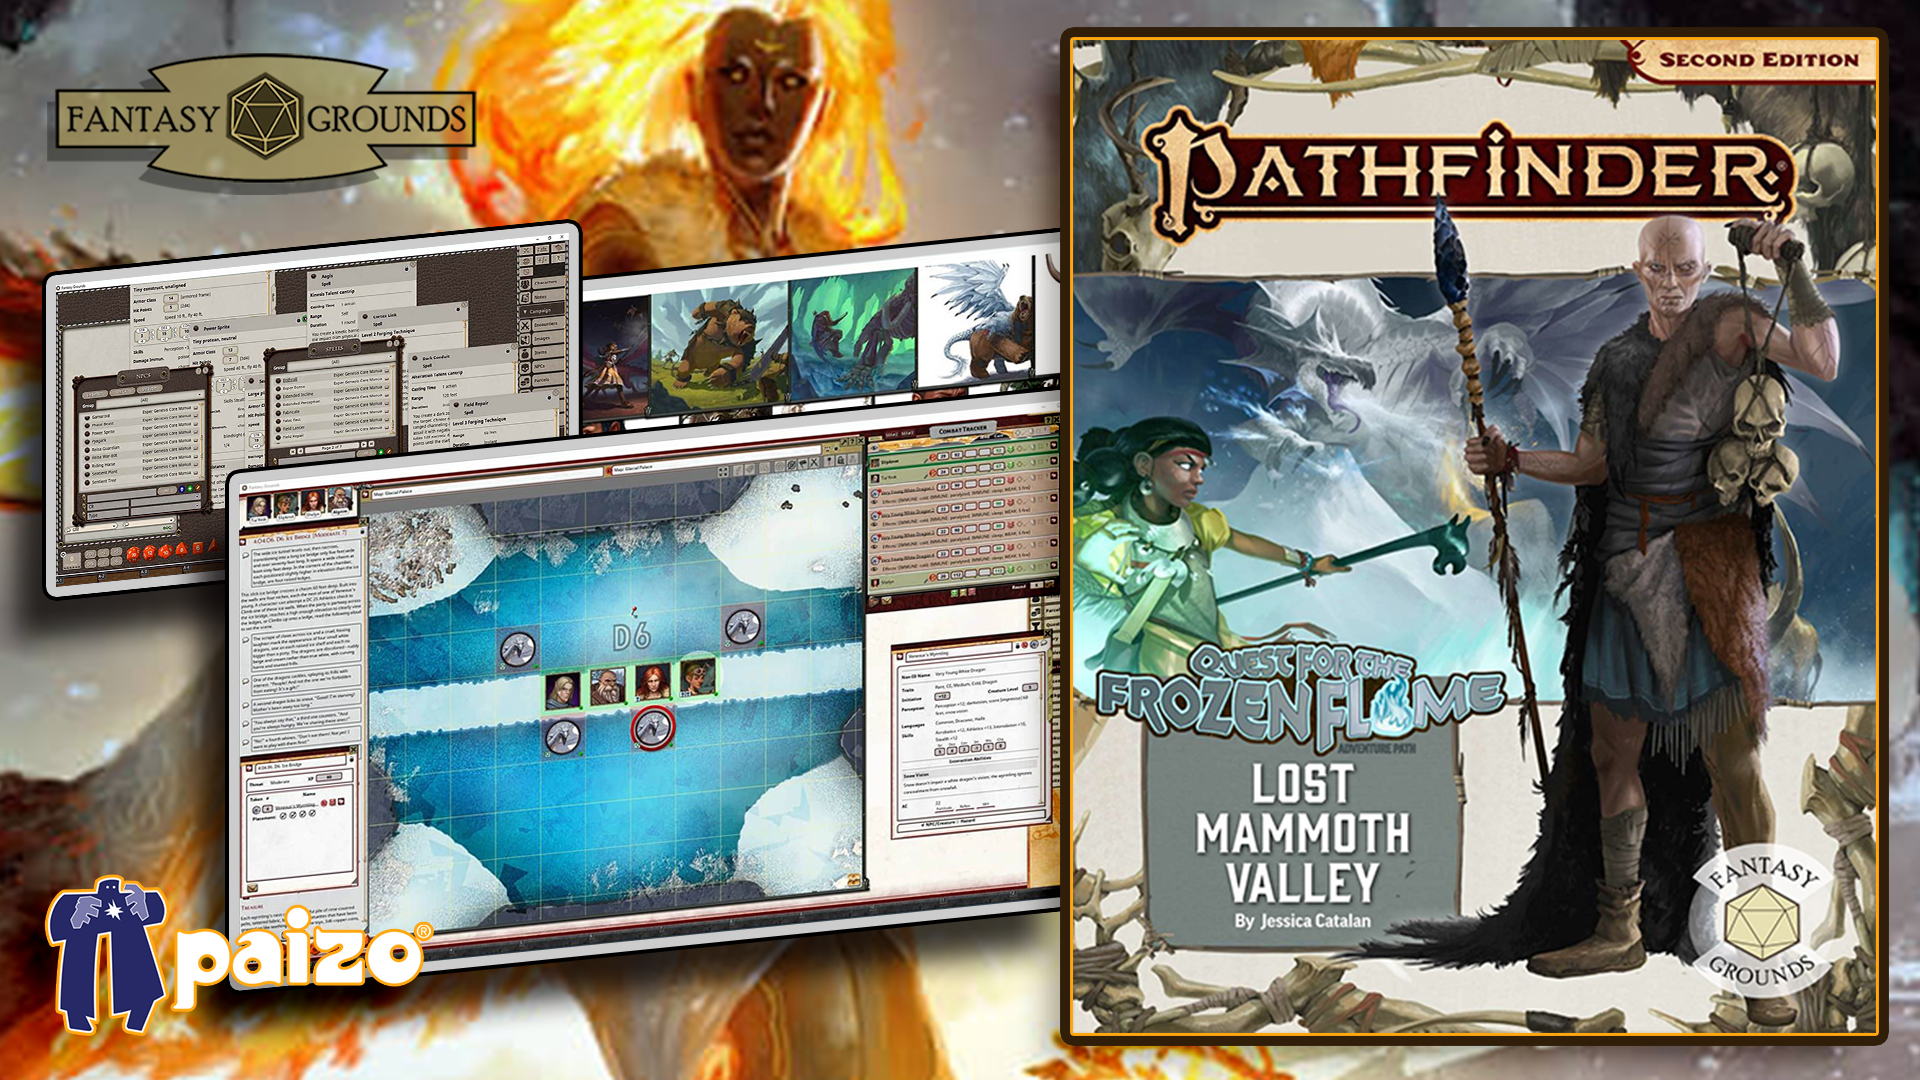 Pathfinder 2 RPG - Quest for the Frozen Flame AP 2 Lost Mammoth Valley(PZOSMWPZO90176FG).jpg